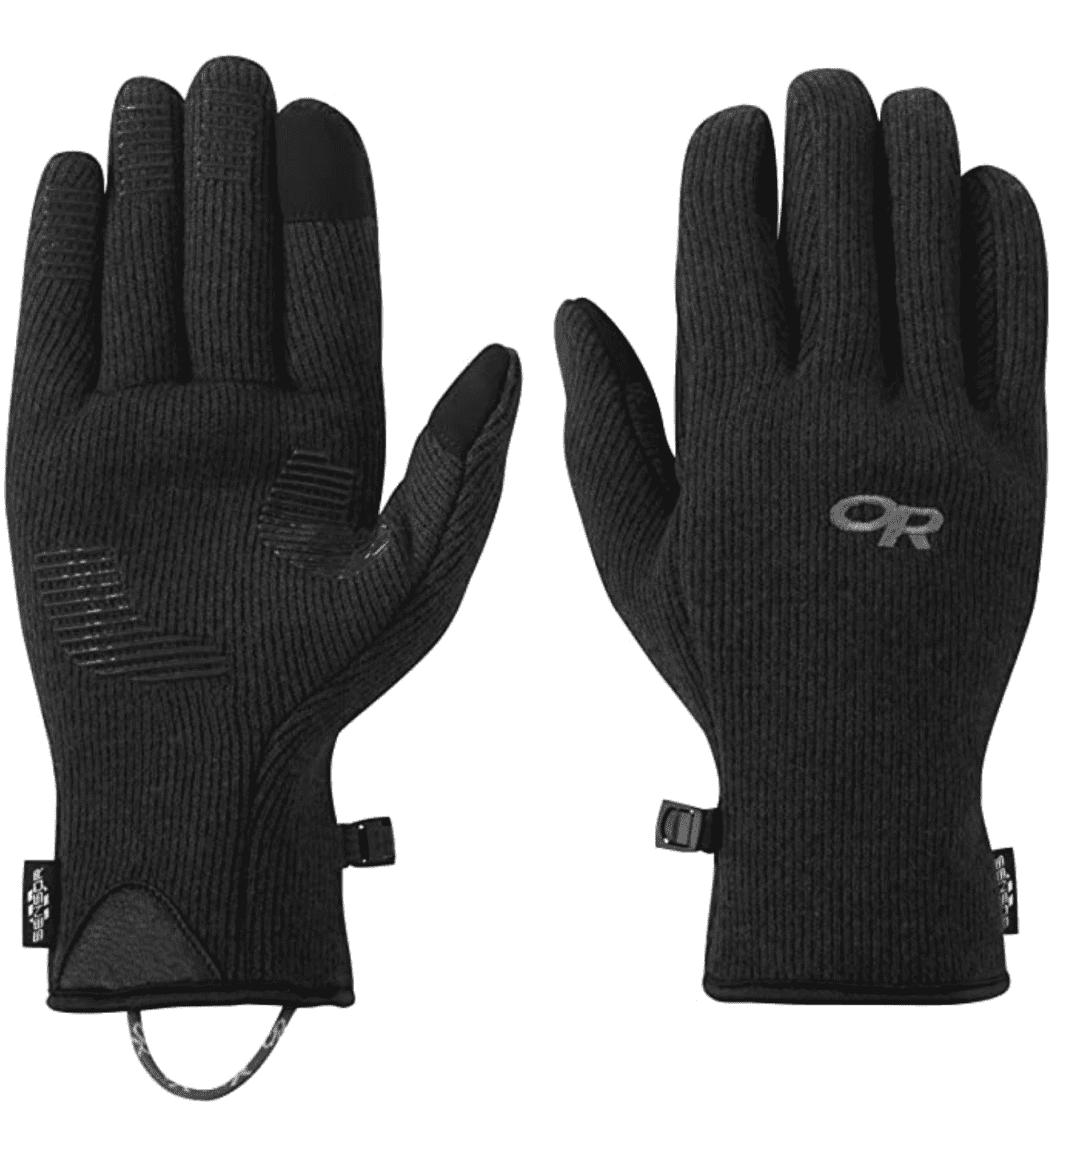 If he lives in a colder climate, these are a great solution for doing daily tasks like driving the car in winter. They are thin enough to provide tactile feedback for controls, but thick enough to keep the chill out on his fingers.